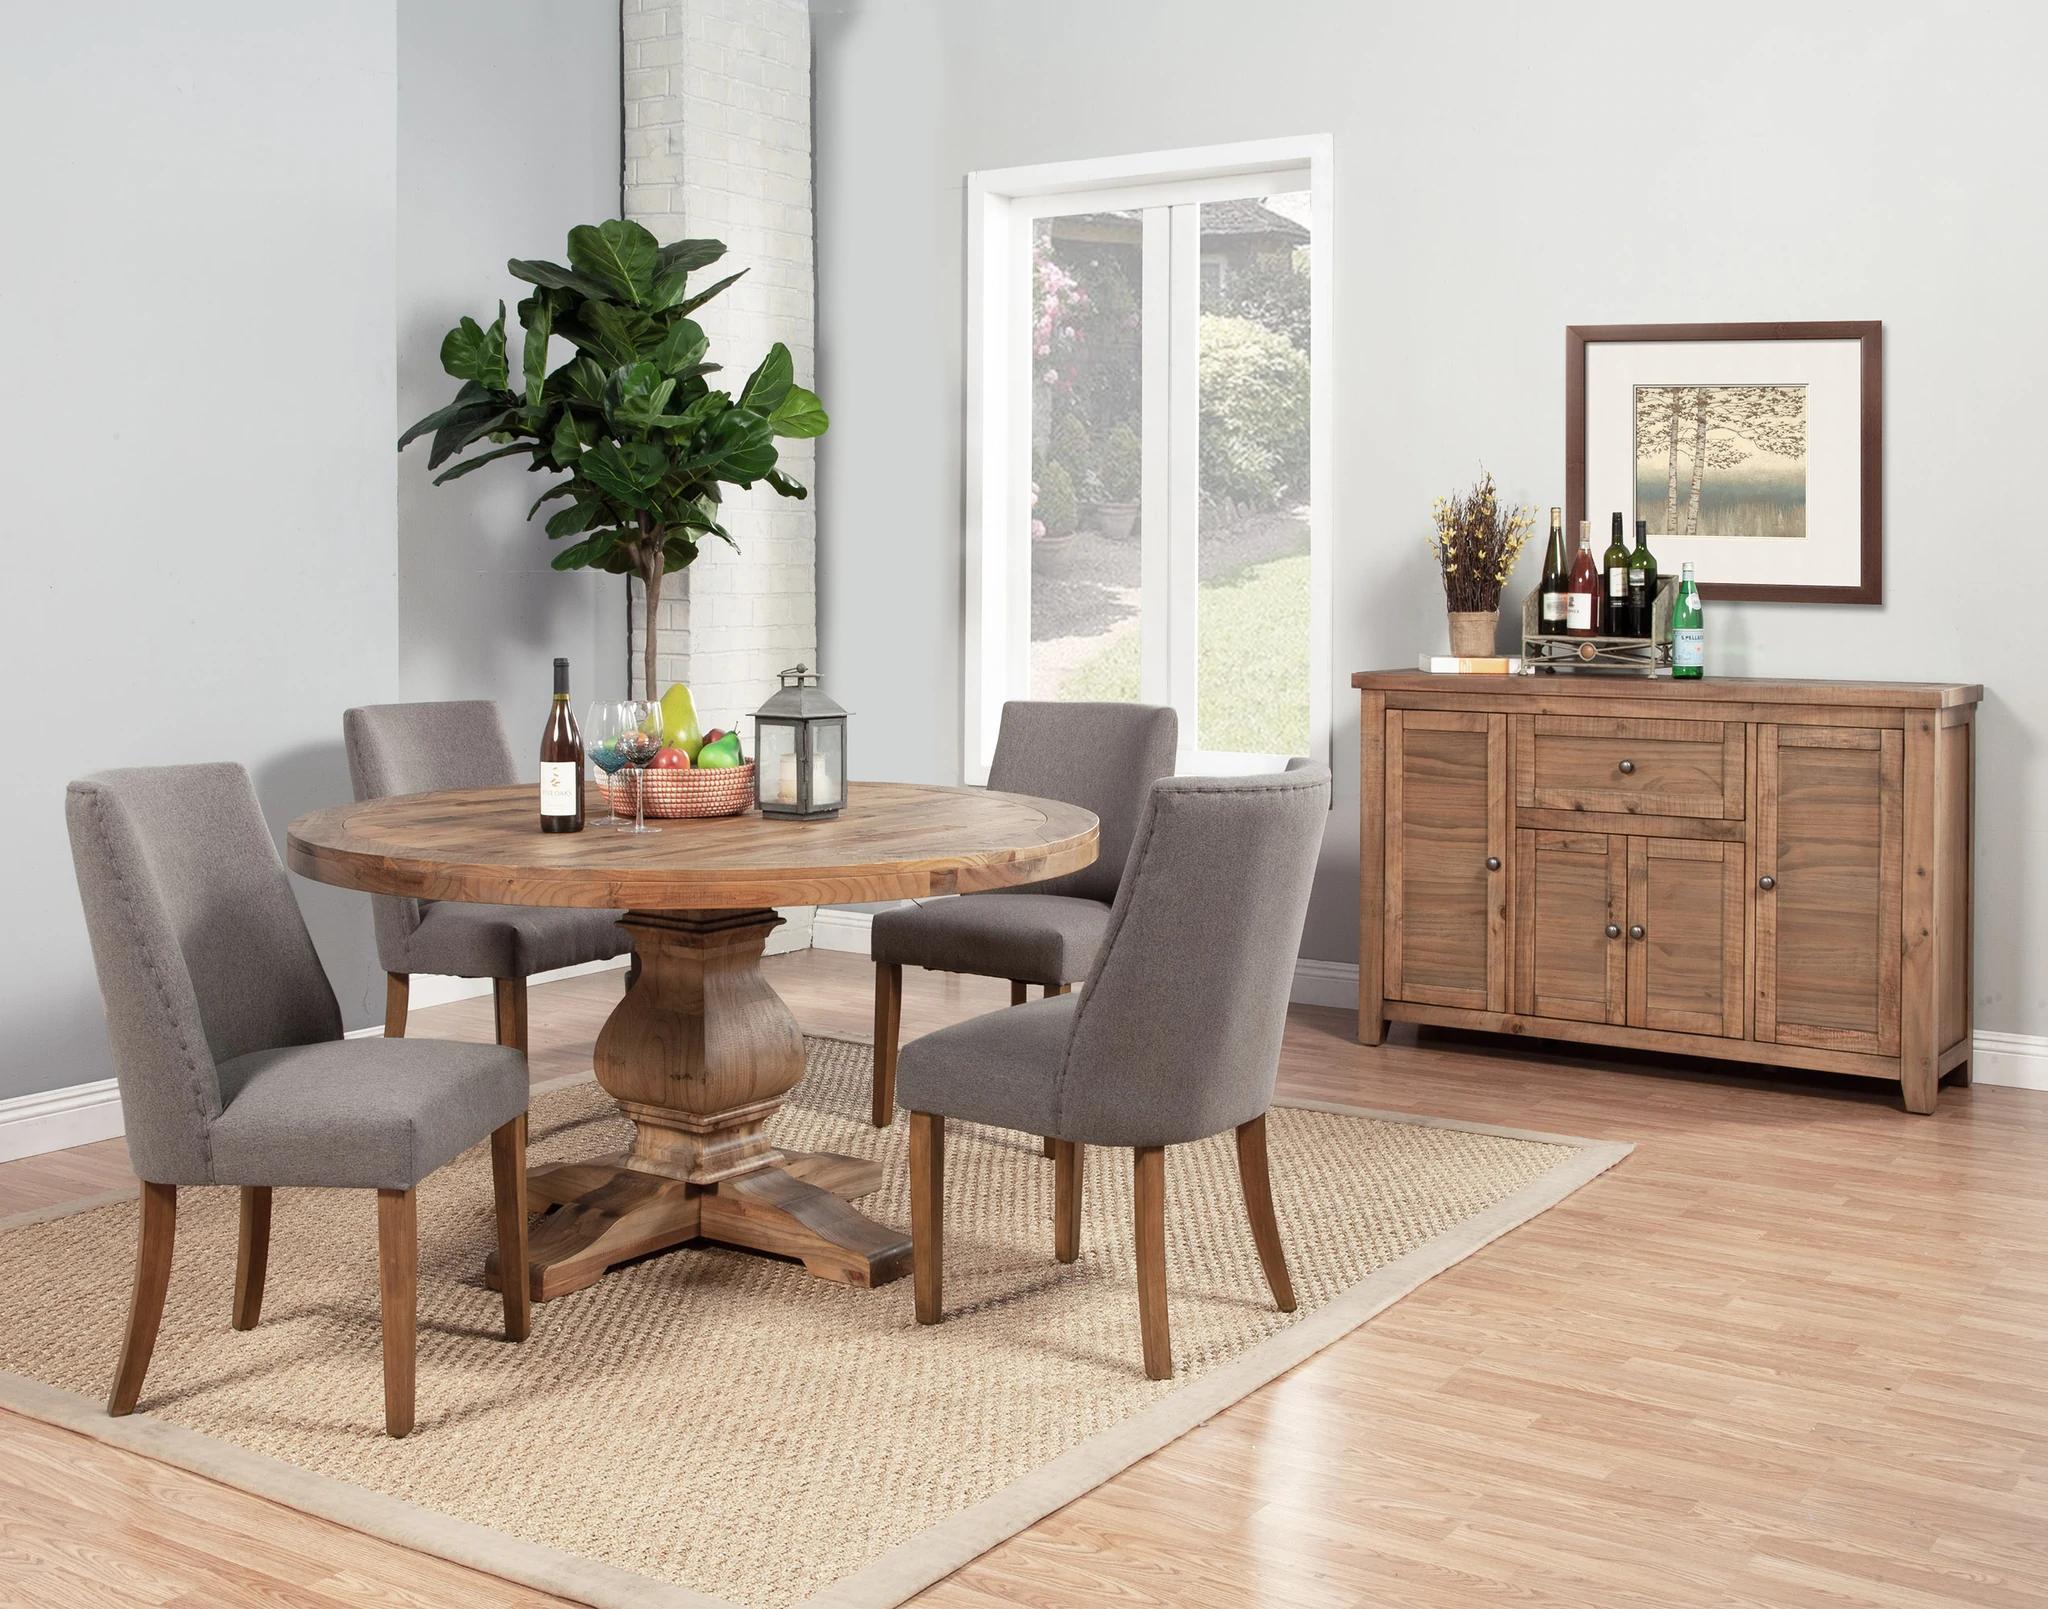 Contemporary, Rustic Dining Table Set KENSINGTON 2668-25-Set-5 in Natural, Gray Fabric